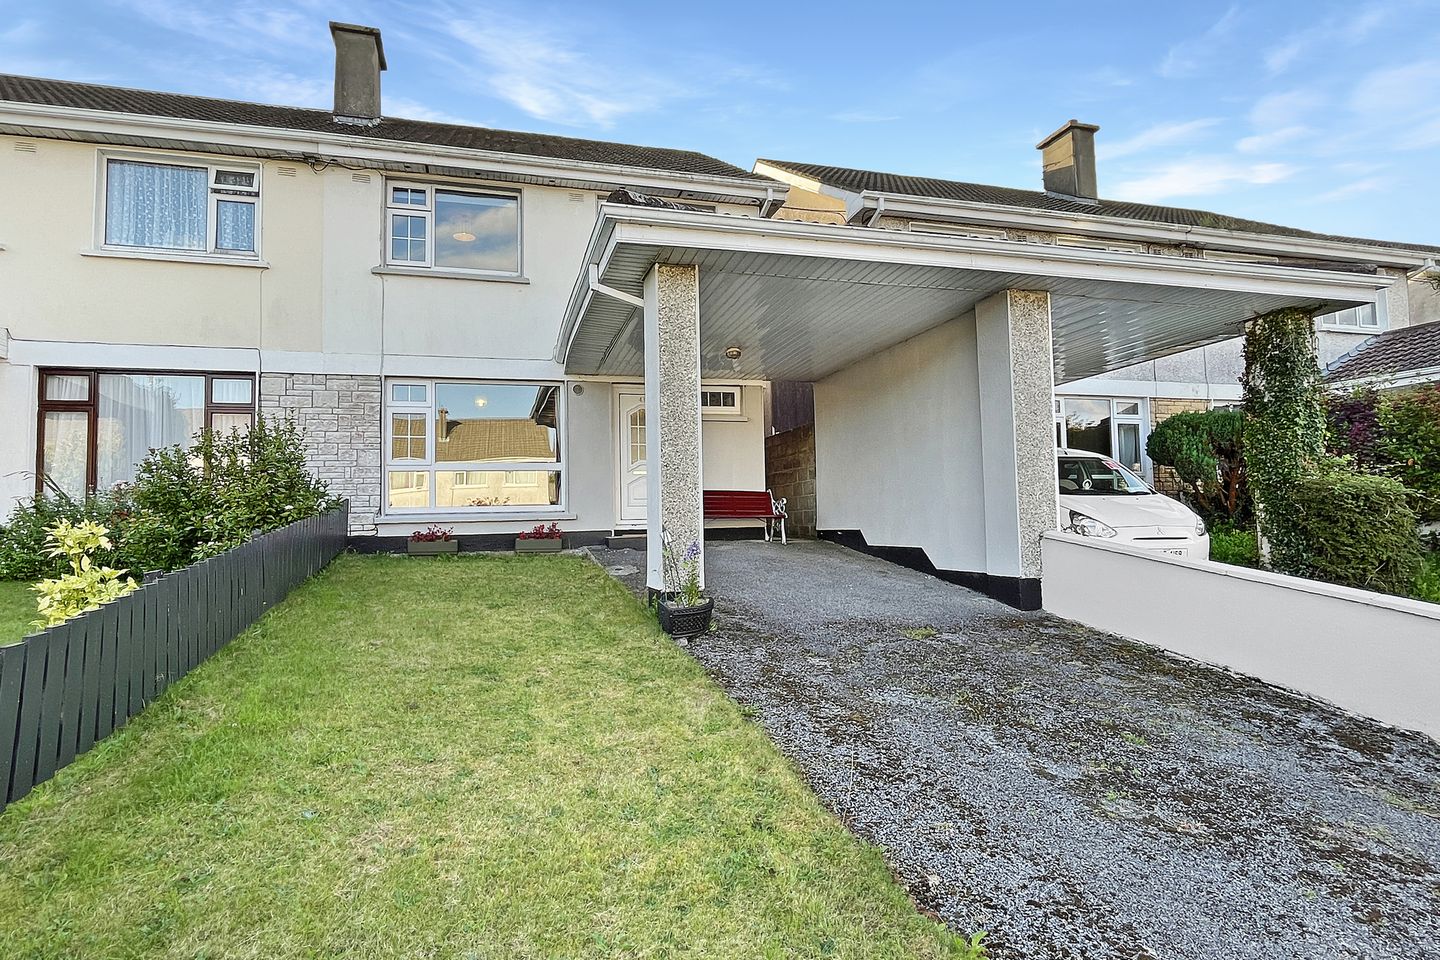 43 Cherry Park, Newcastle, Co. Galway, H91C67P